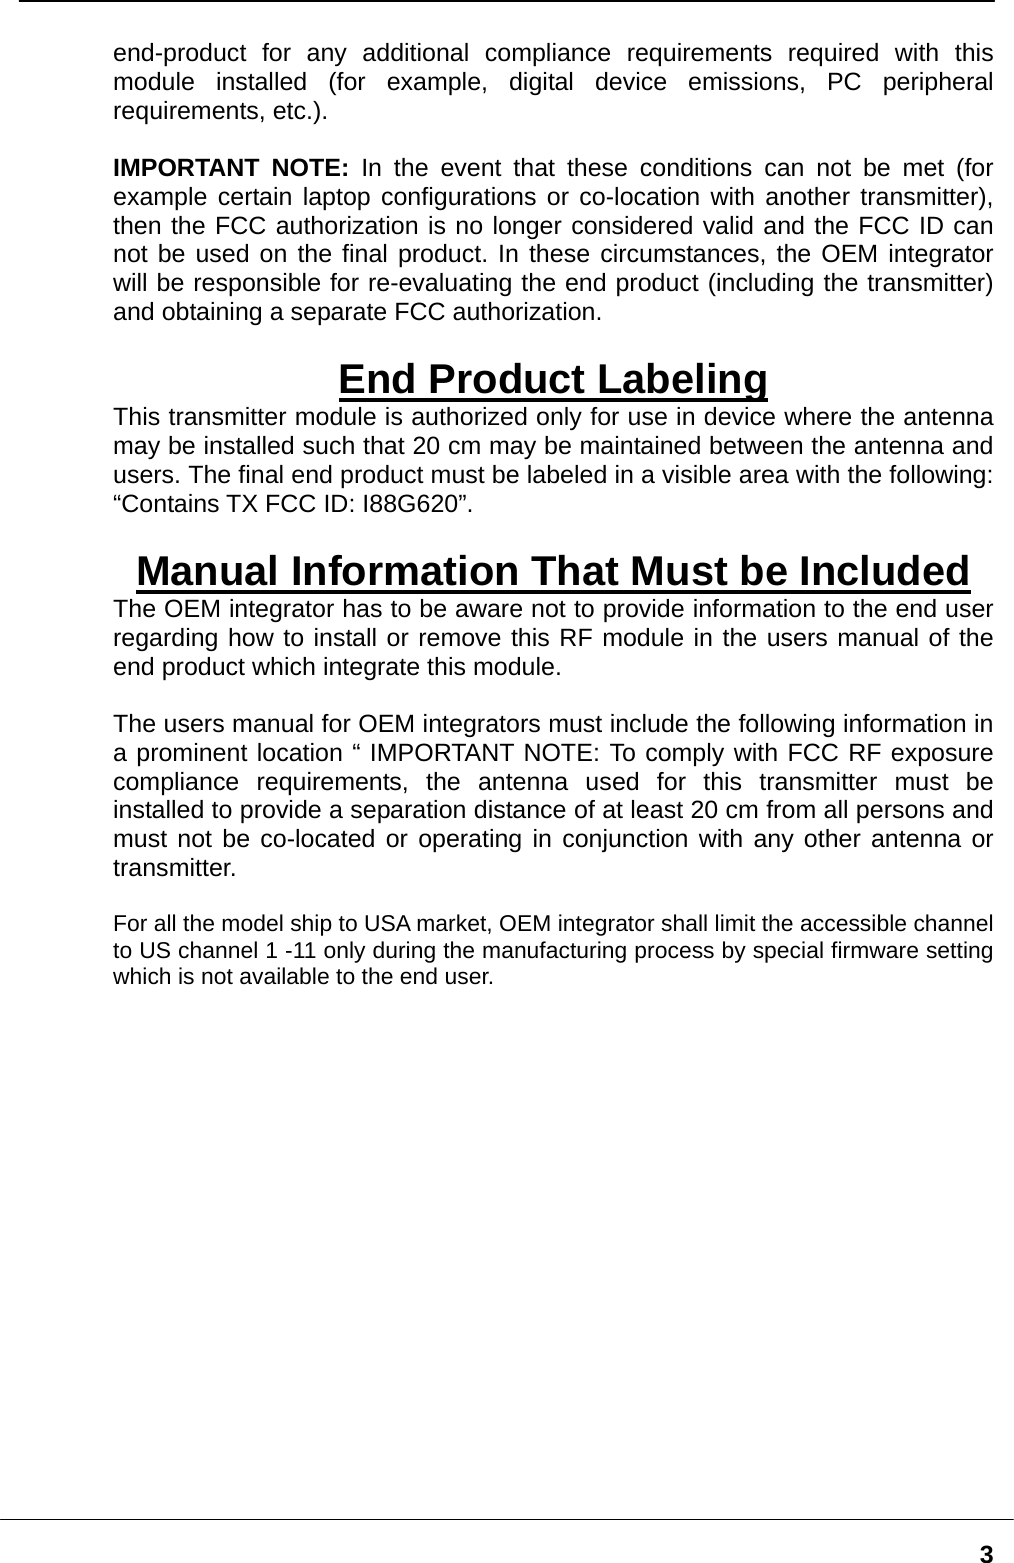   3end-product for any additional compliance requirements required with this module installed (for example, digital device emissions, PC peripheral requirements, etc.).  IMPORTANT NOTE: In the event that these conditions can not be met (for example certain laptop configurations or co-location with another transmitter), then the FCC authorization is no longer considered valid and the FCC ID can not be used on the final product. In these circumstances, the OEM integrator will be responsible for re-evaluating the end product (including the transmitter) and obtaining a separate FCC authorization.  End Product Labeling This transmitter module is authorized only for use in device where the antenna may be installed such that 20 cm may be maintained between the antenna and users. The final end product must be labeled in a visible area with the following: “Contains TX FCC ID: I88G620”.  Manual Information That Must be Included The OEM integrator has to be aware not to provide information to the end user regarding how to install or remove this RF module in the users manual of the end product which integrate this module.  The users manual for OEM integrators must include the following information in a prominent location “ IMPORTANT NOTE: To comply with FCC RF exposure compliance requirements, the antenna used for this transmitter must be installed to provide a separation distance of at least 20 cm from all persons and must not be co-located or operating in conjunction with any other antenna or transmitter.  For all the model ship to USA market, OEM integrator shall limit the accessible channel to US channel 1 -11 only during the manufacturing process by special firmware setting which is not available to the end user. 